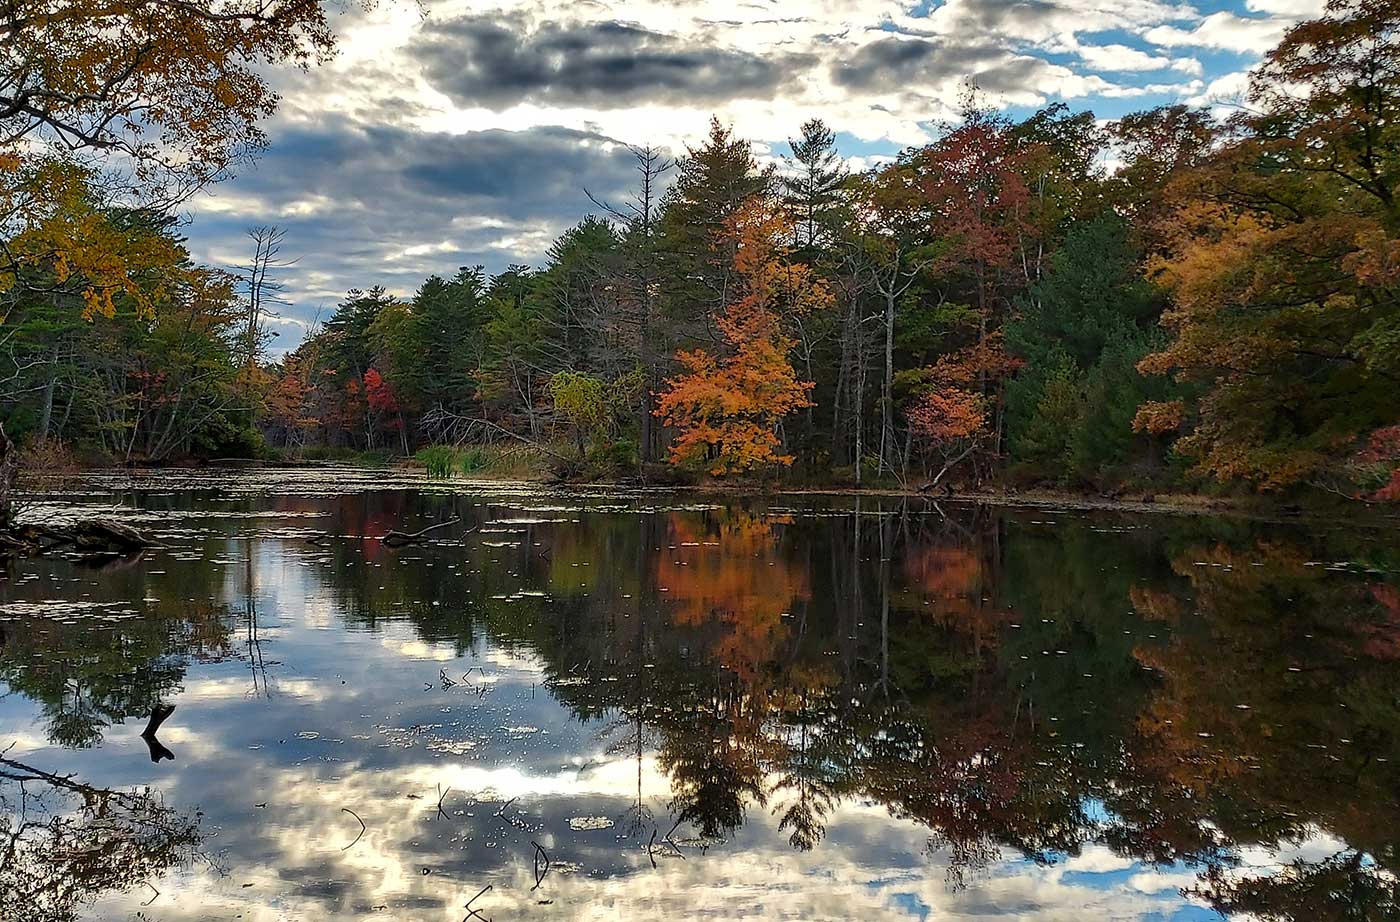 Pond surrounded by trees with fall foliage